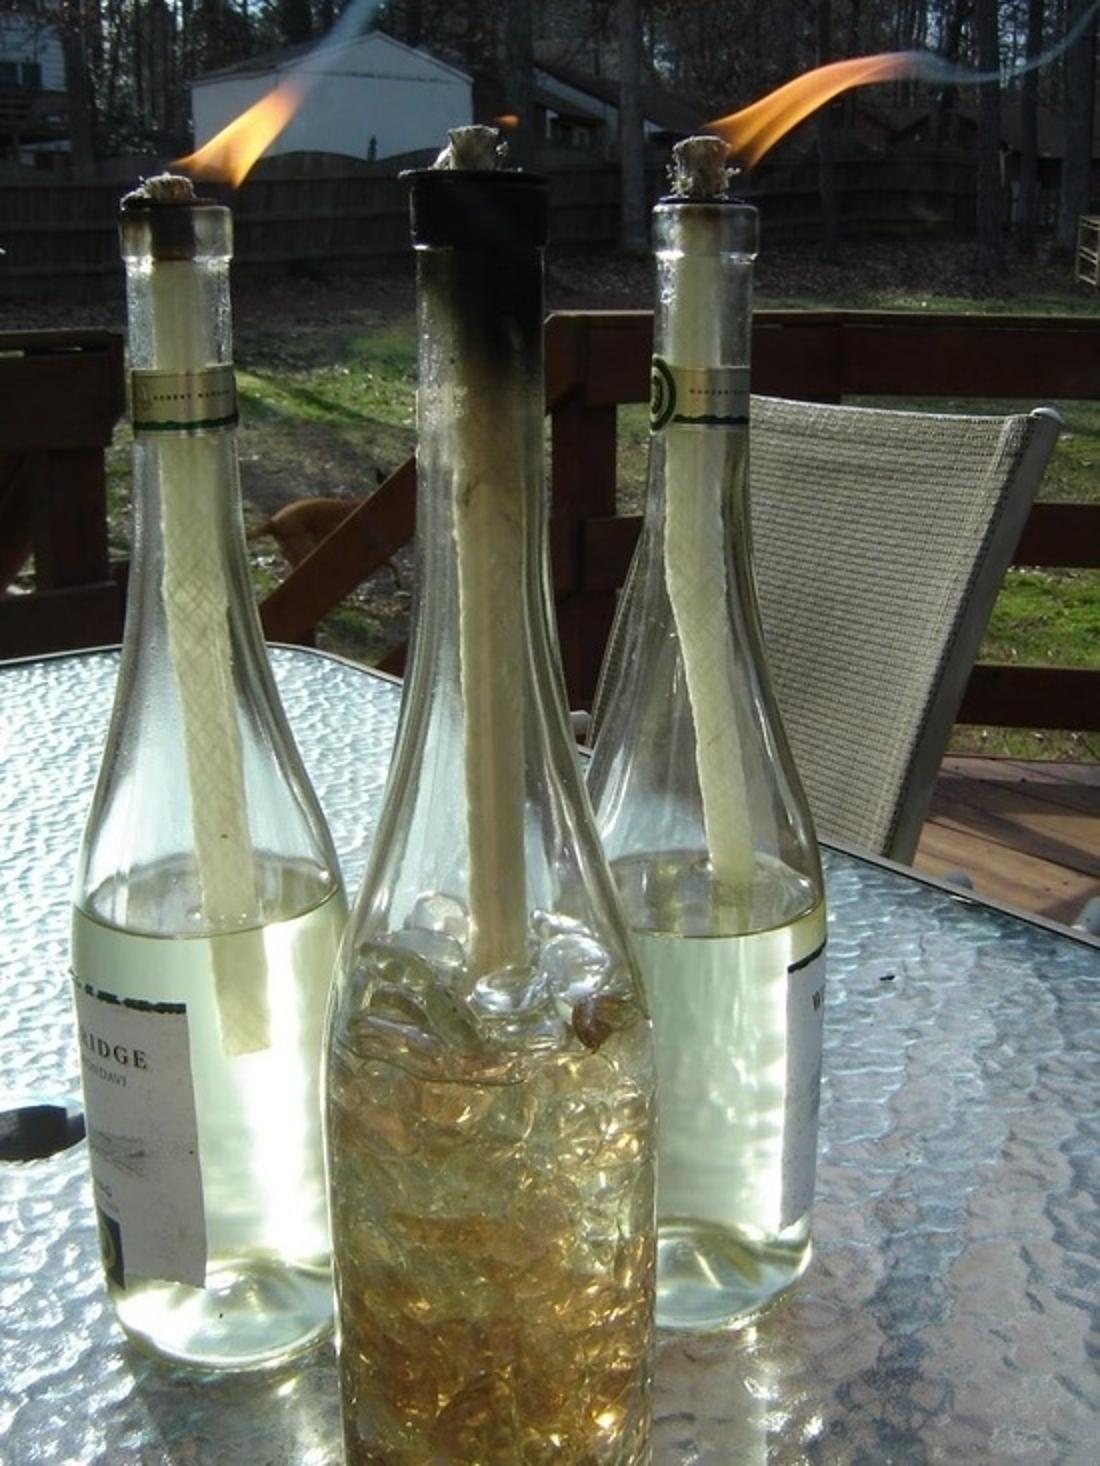 Reuse your empty wine bottles by making mosquito-combating tiki torches.